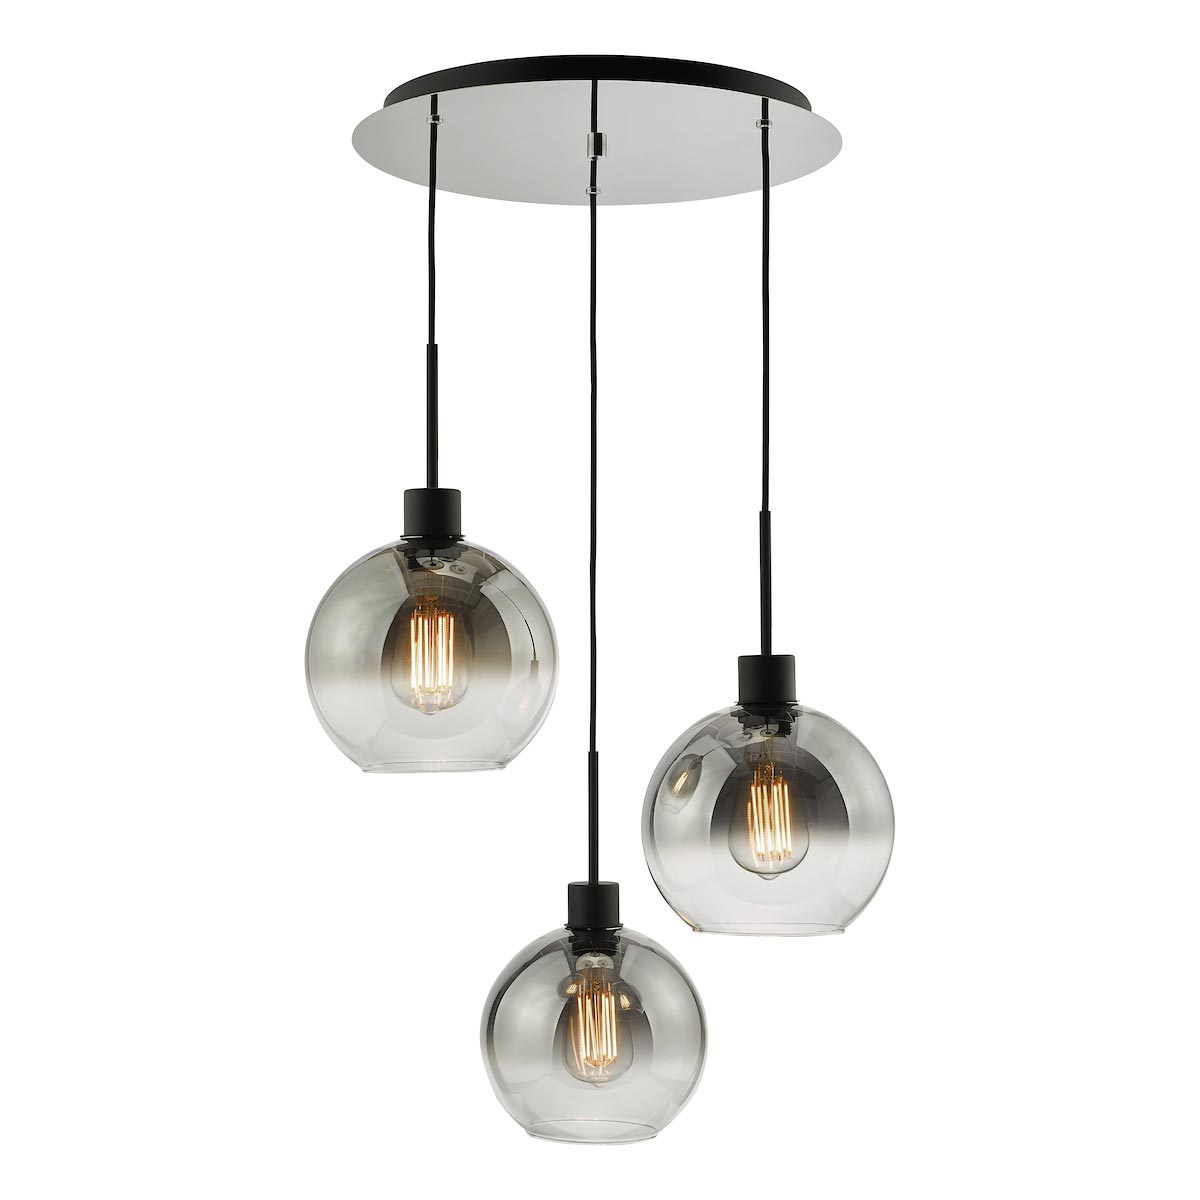 Lycia 3 Light Cluster Ceiling Pendant Black Smoked Glass